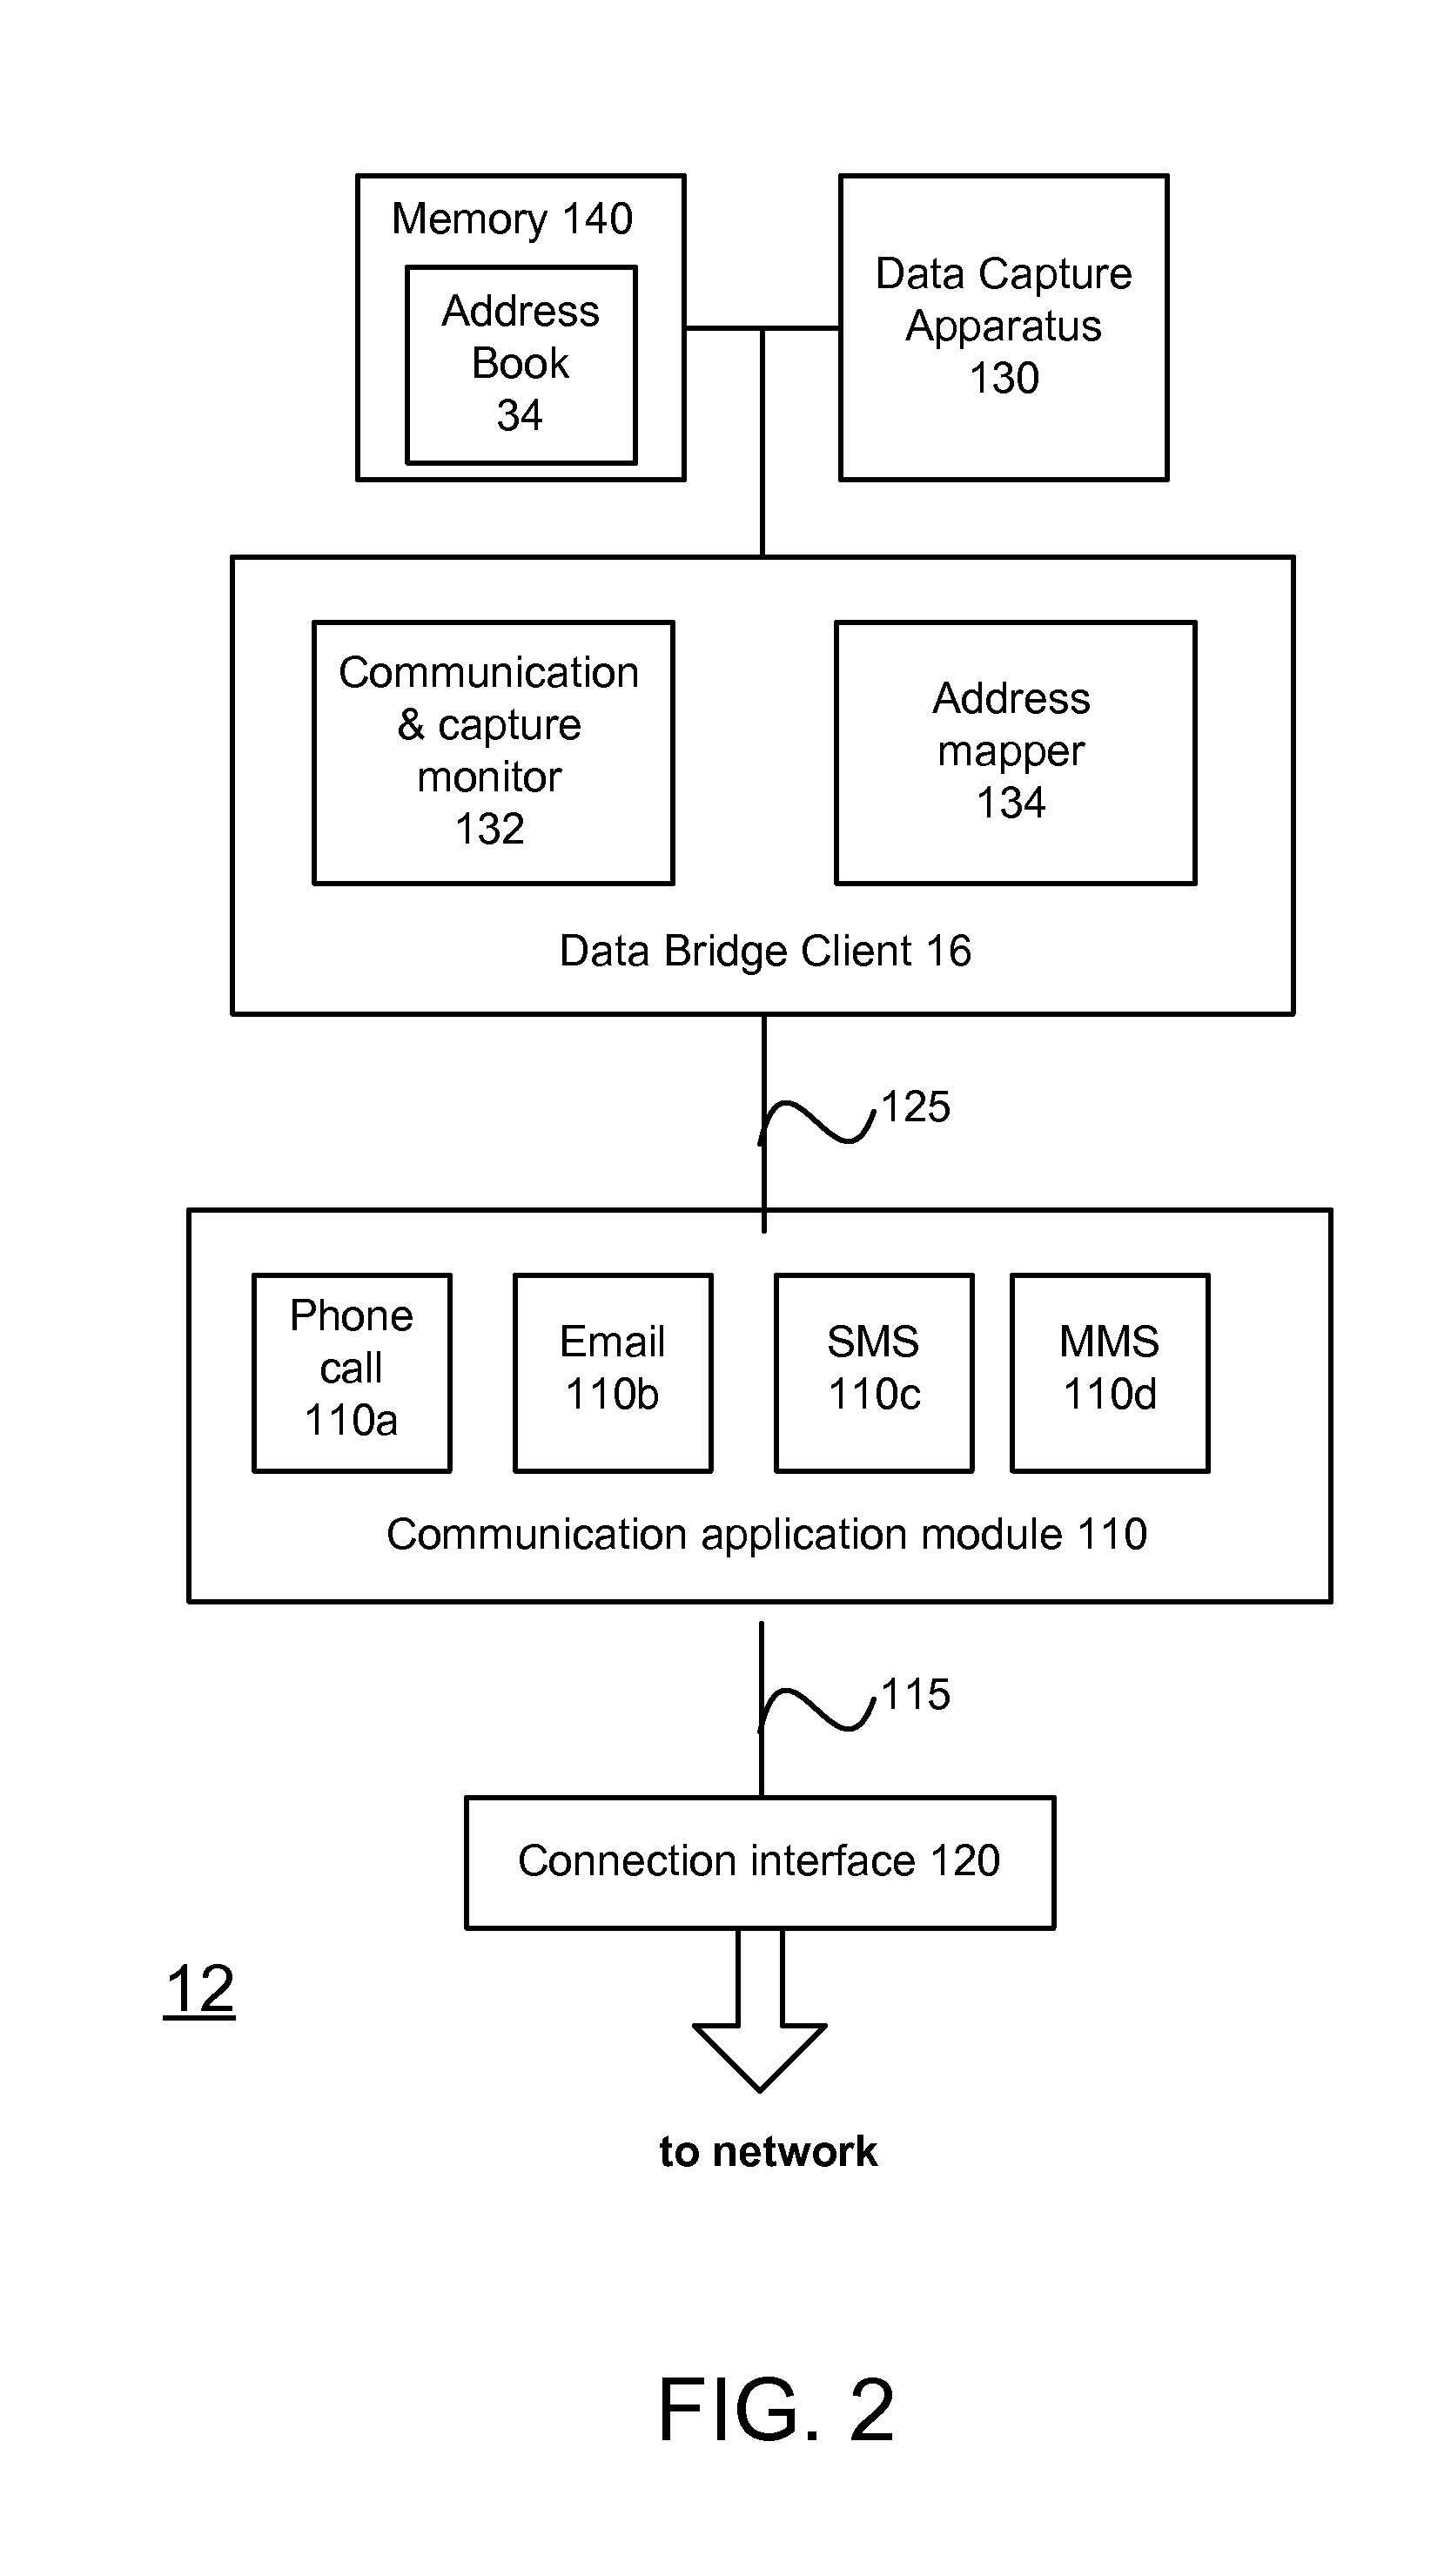 Method and apparatus for automatically sending a captured image to a phone call participant